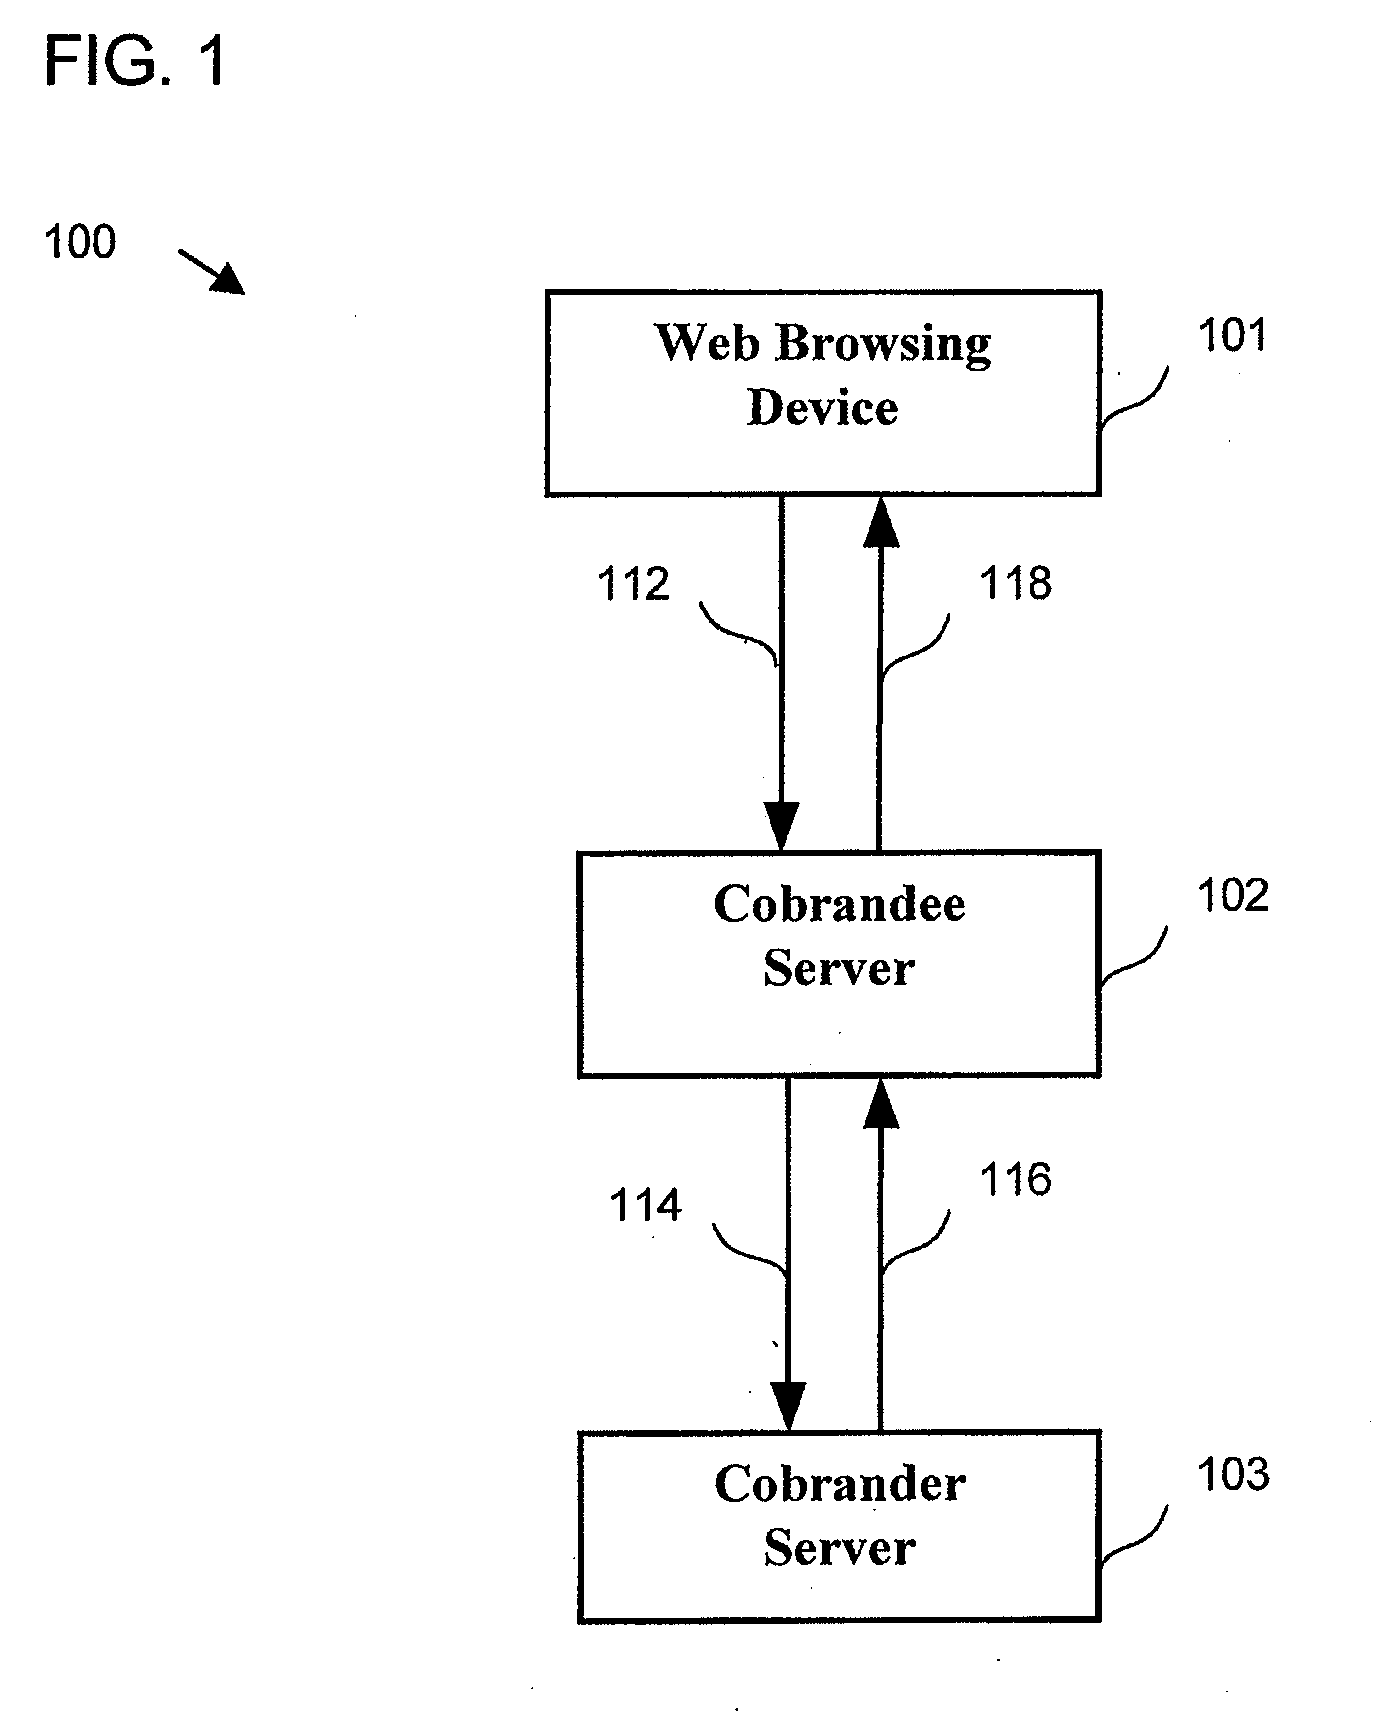 Method for Flexible, Safe, Robust, and Efficient Generation and Serving of Multi-Source World-Wide Web Content Pages